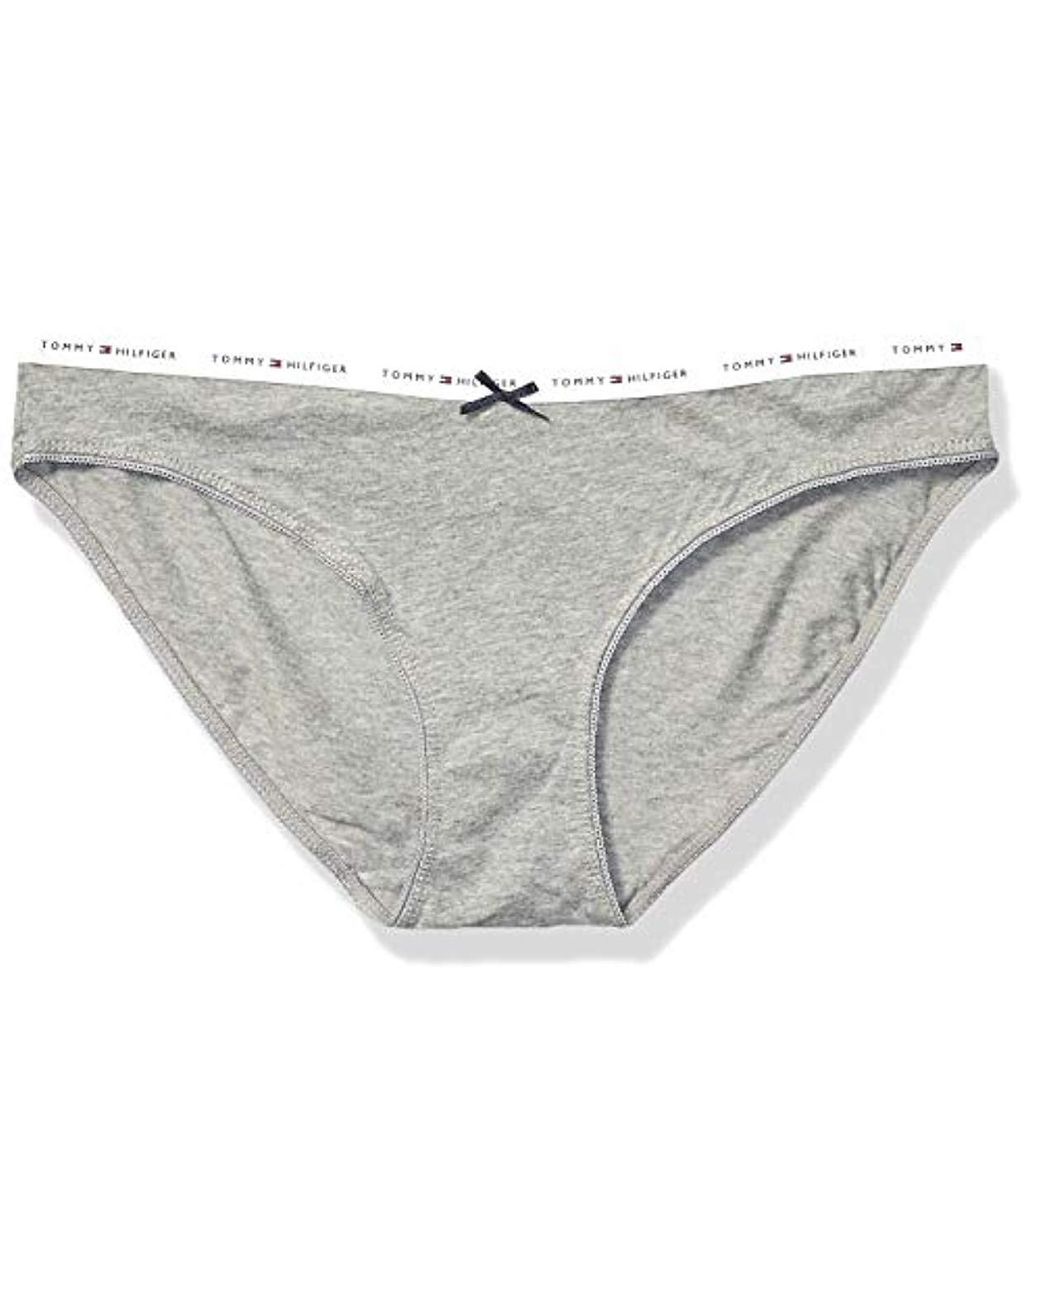 Grey Hipster Panty Tommy Hilfiger Underwear Women's Iconic Cotton Shorty Brief